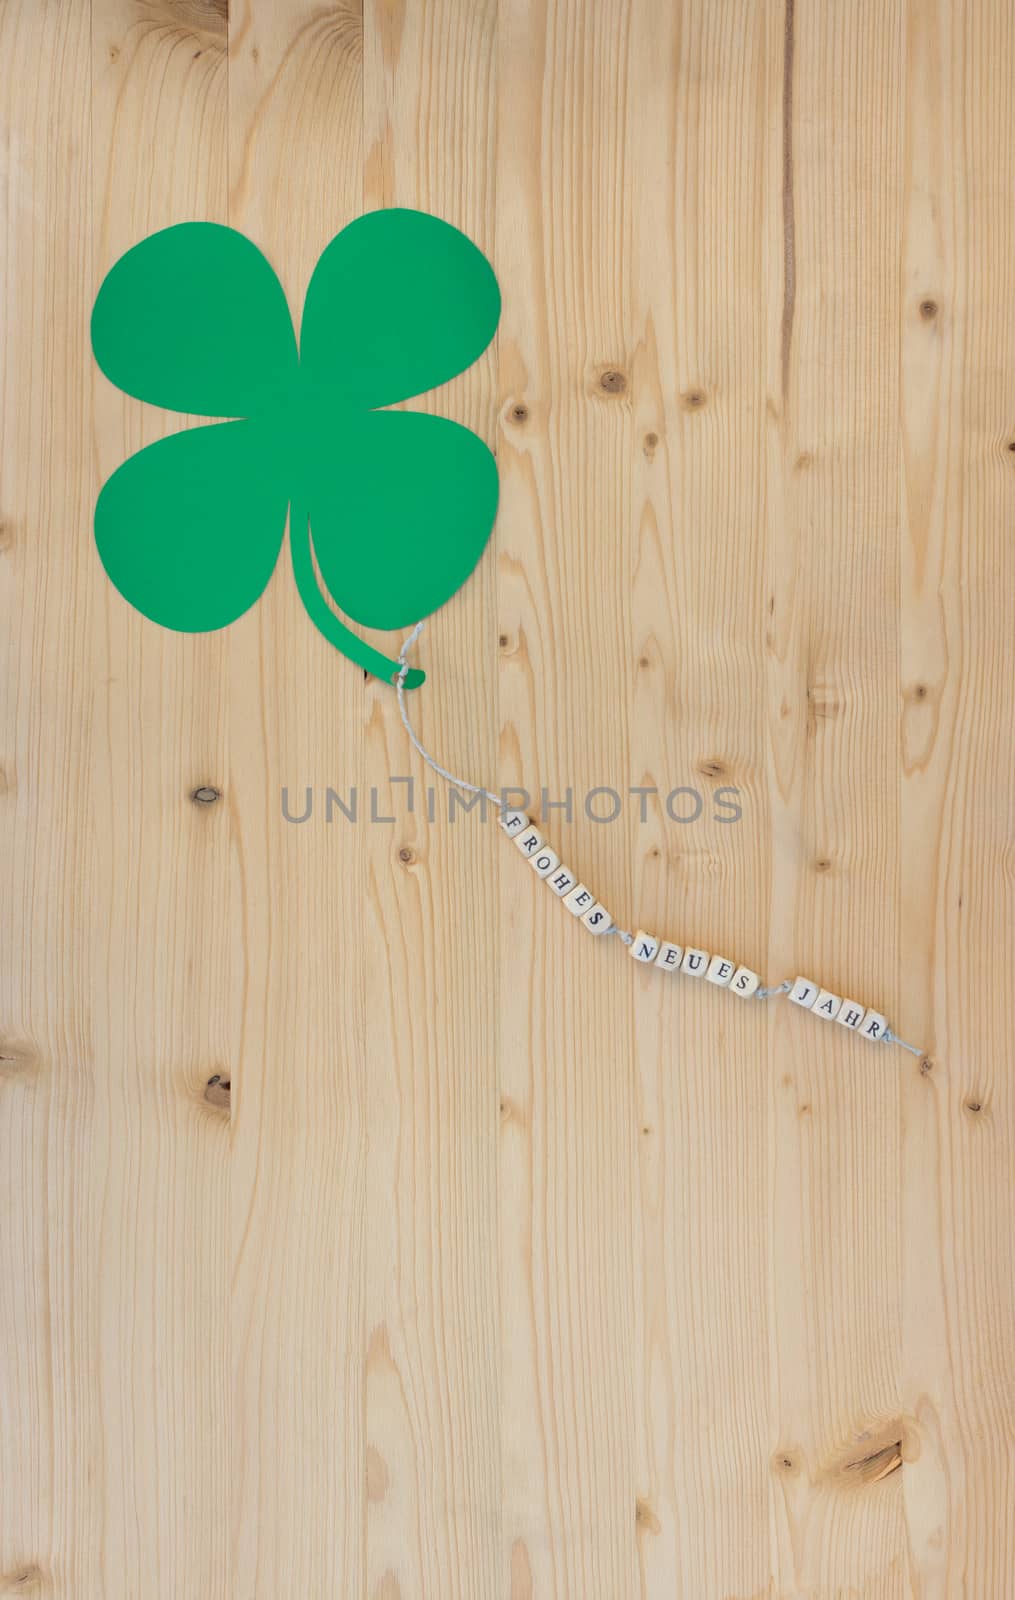 The german words for Happy New Year and a cloverleaf on a cord on wood